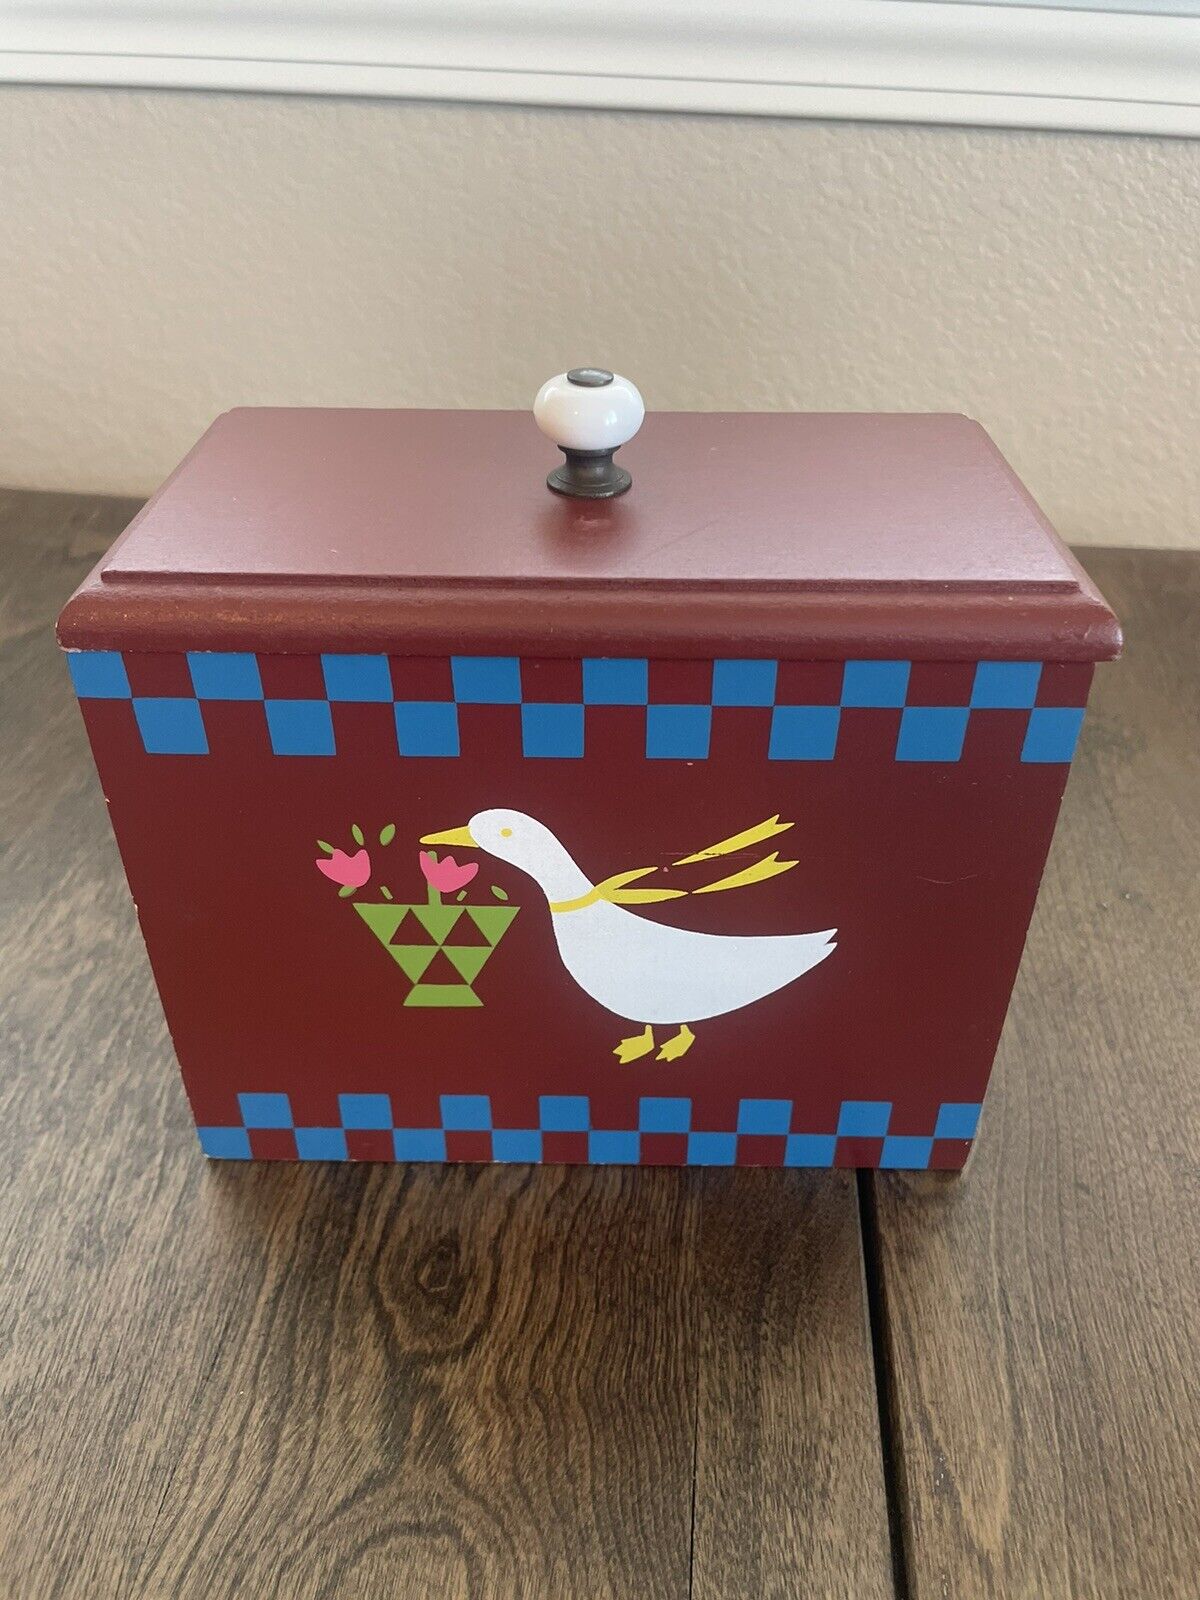 Vintage Wooden Box Recipe Card Holder With Lid Country Goose Check Design